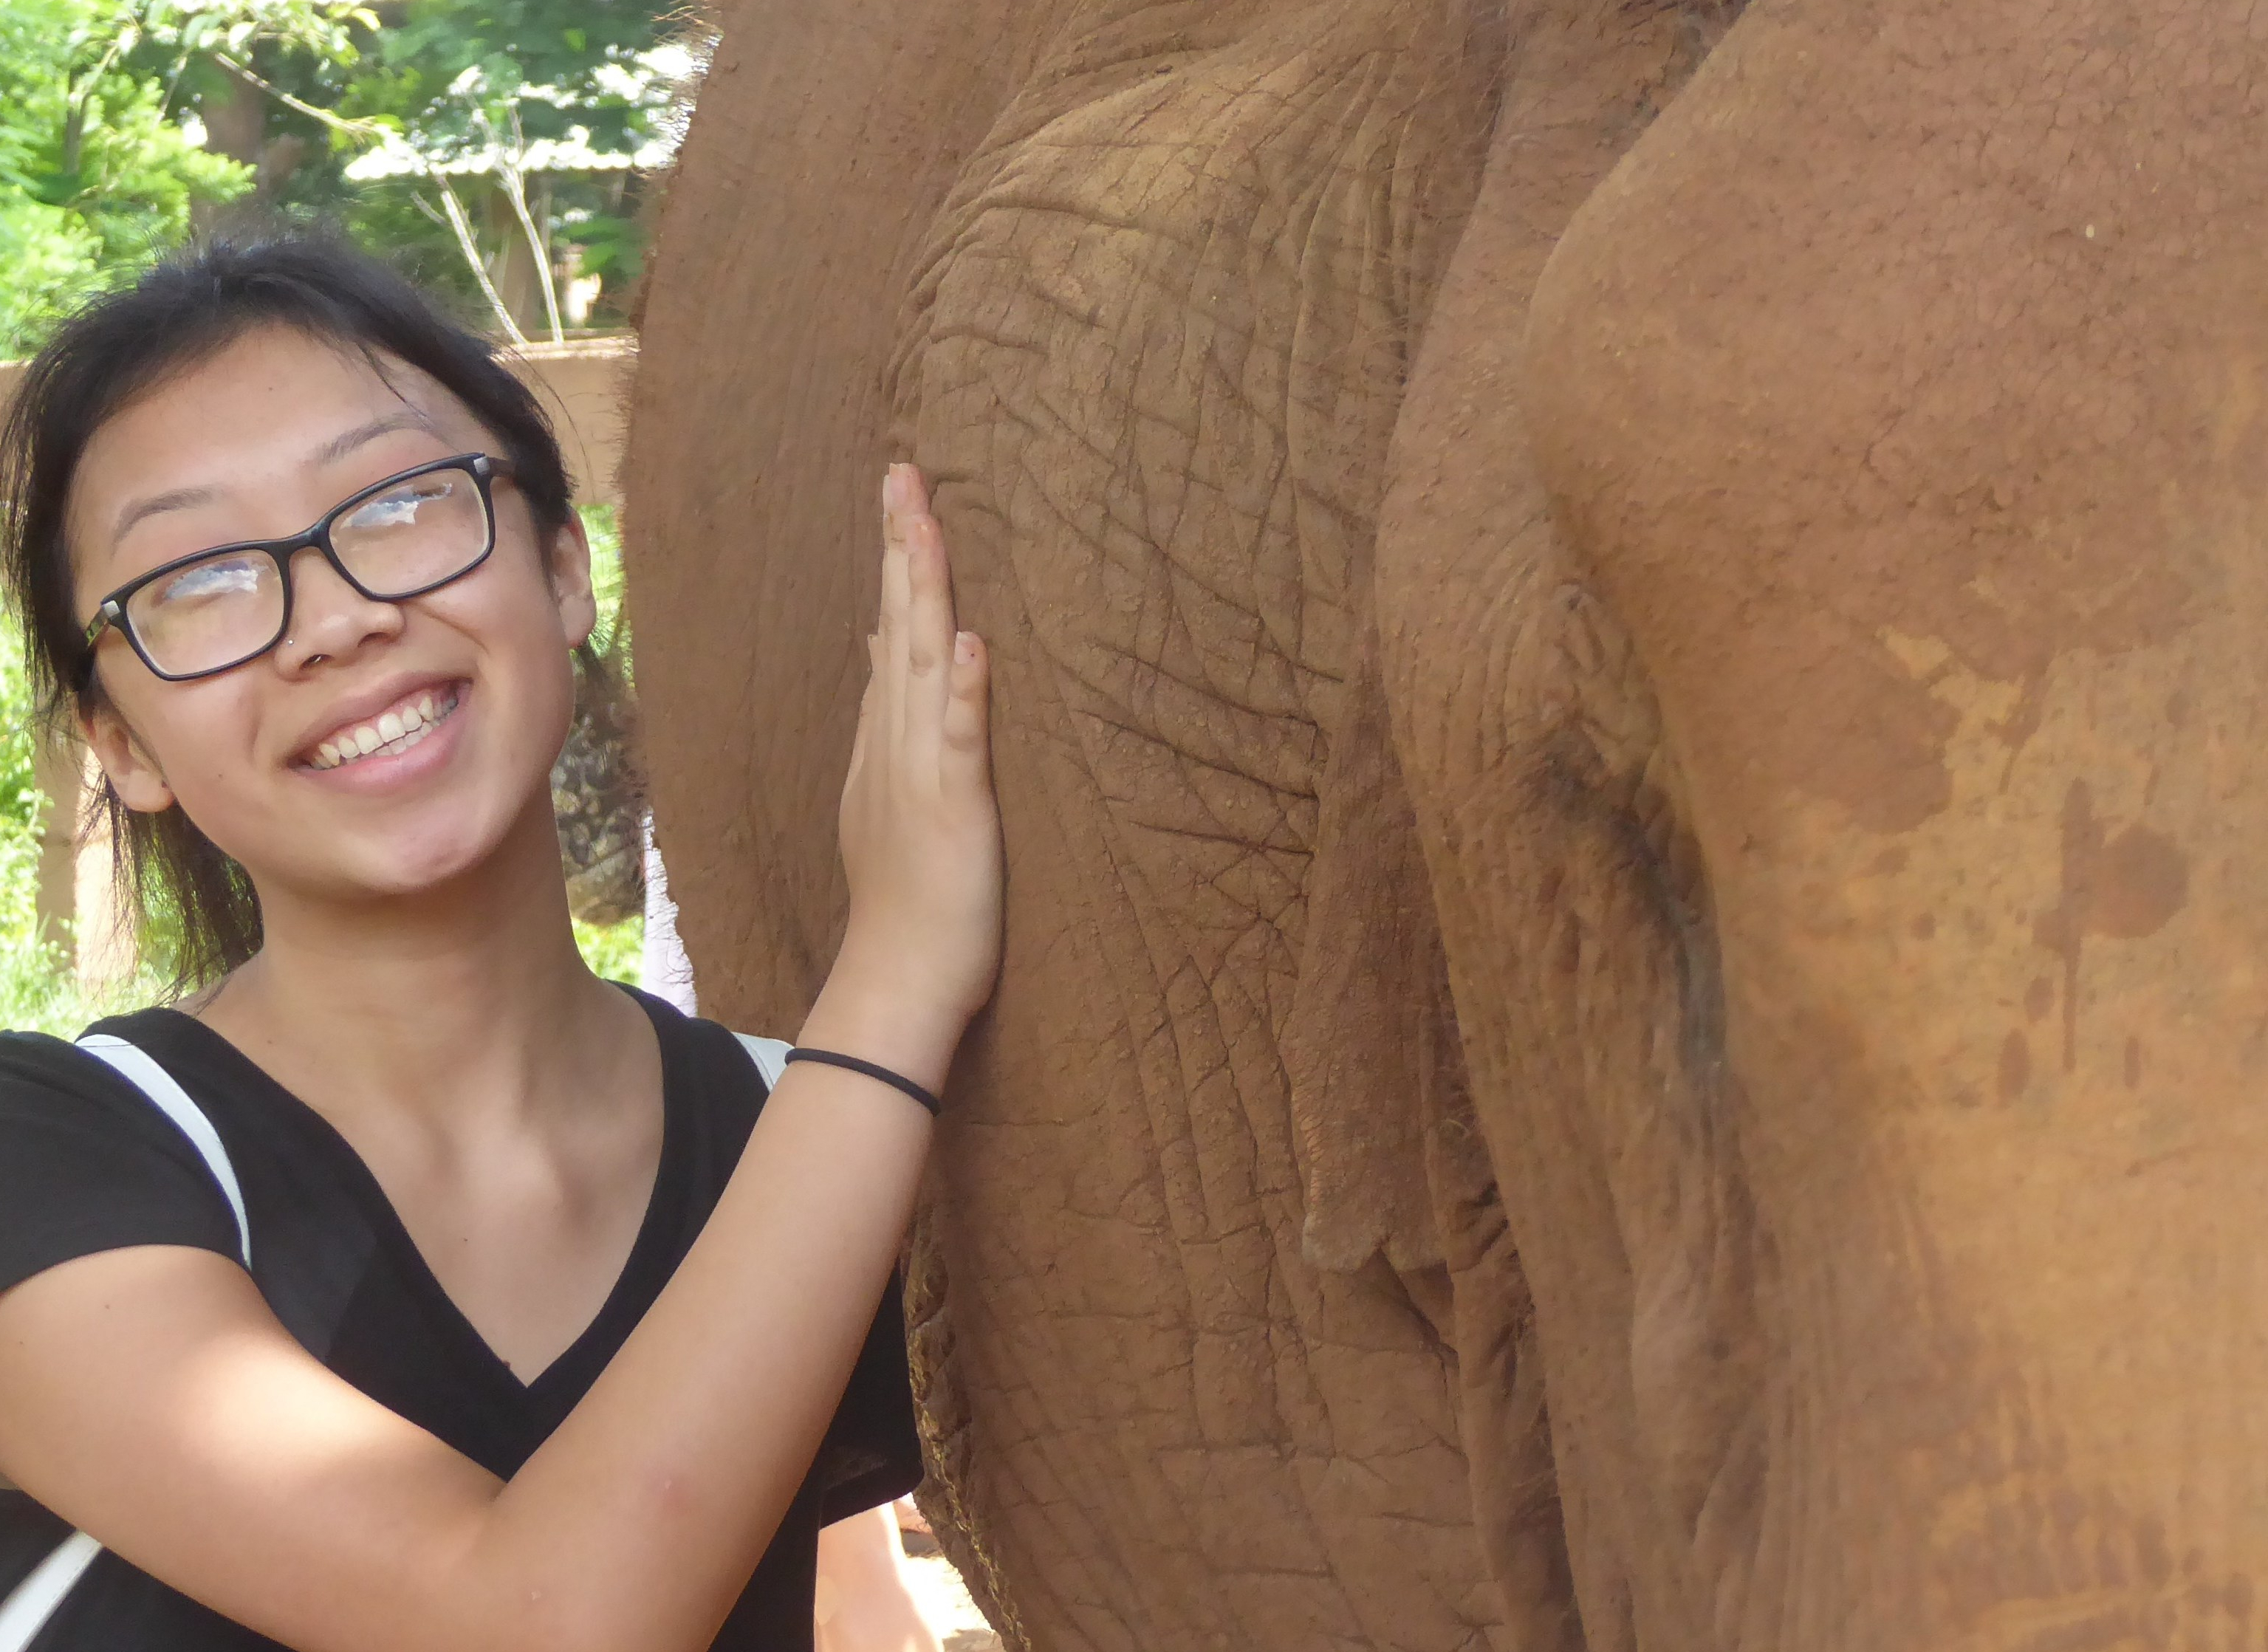 Julie with her elephant friend at the amazing Elephant Nature Park sanctuary in Chiang Mai